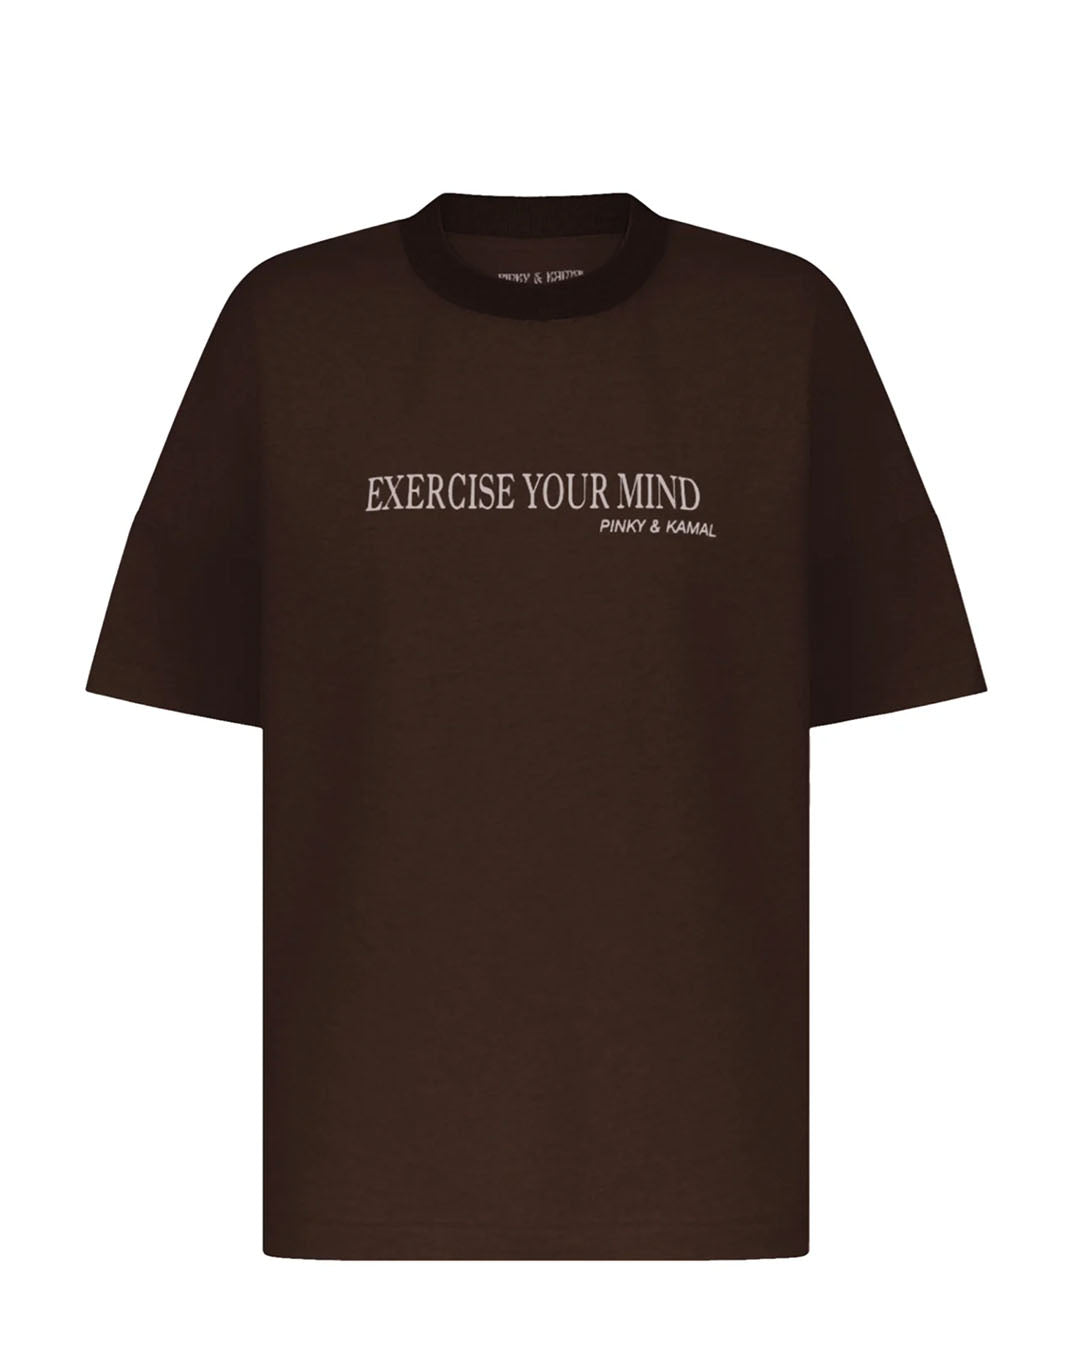 Exercise Your Mind T-Shirt - Cacao Activewear by Pinky & Kamal - Prae Store